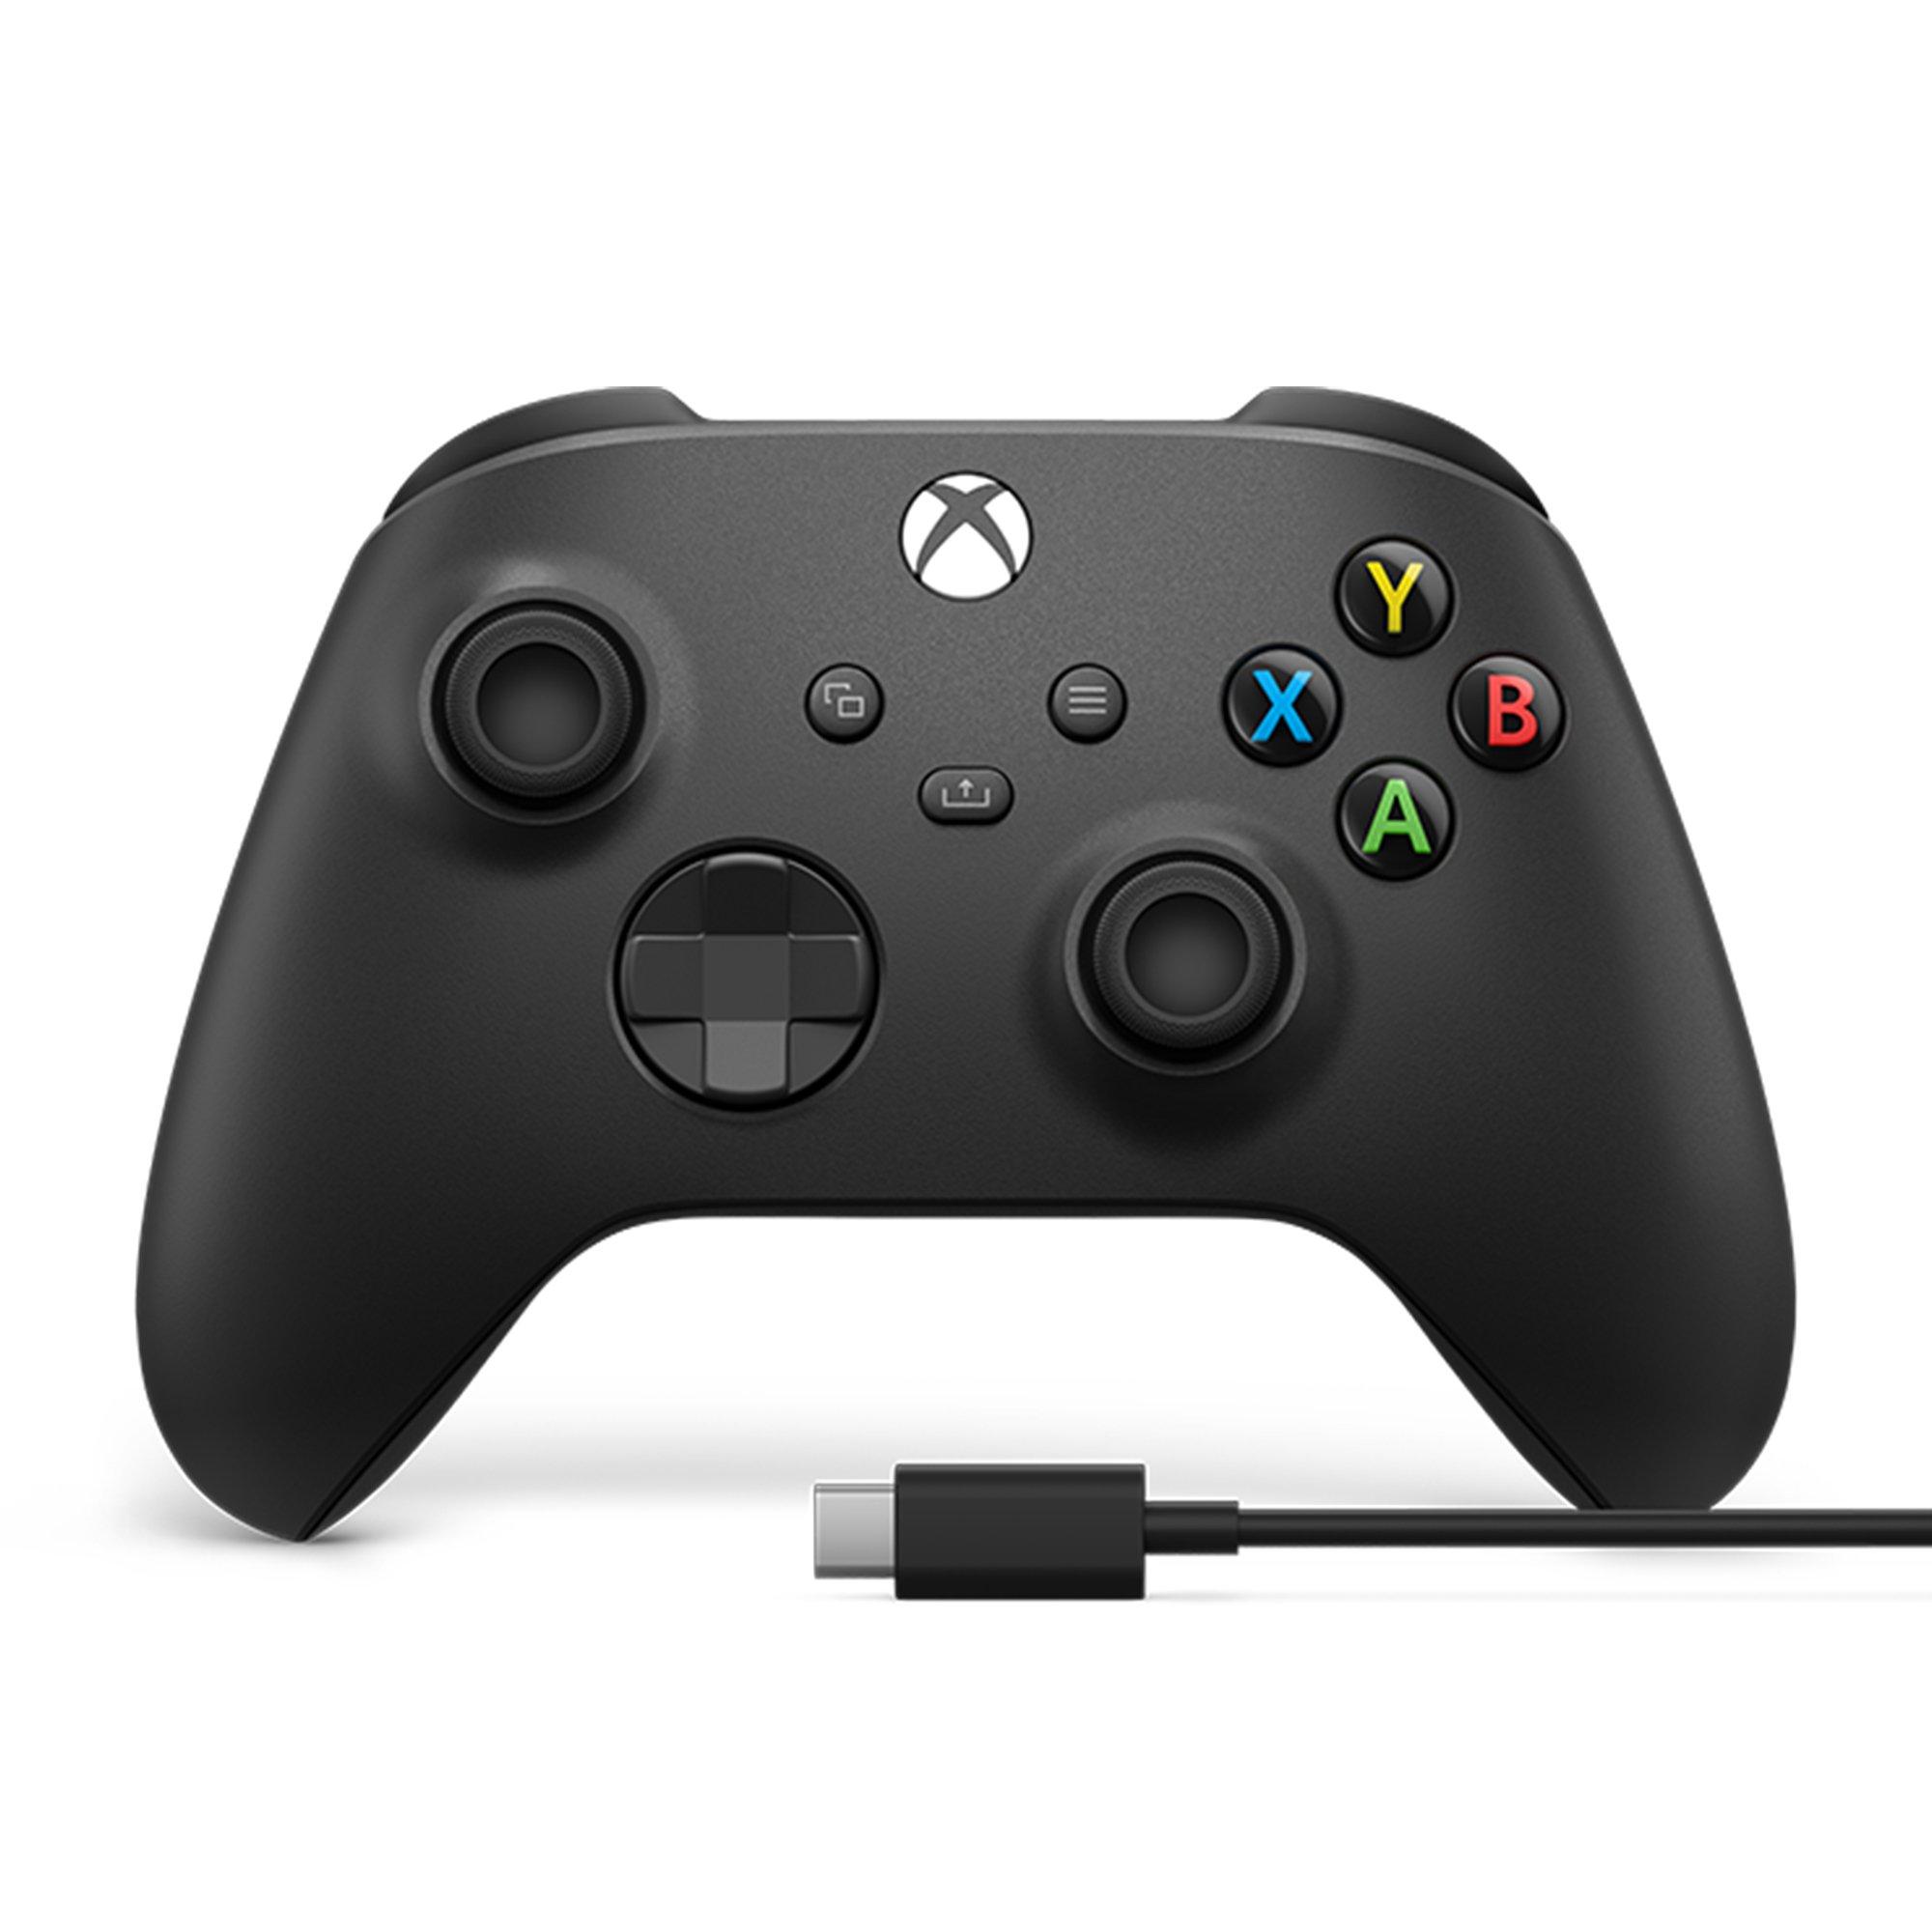 target xbox one s power cord